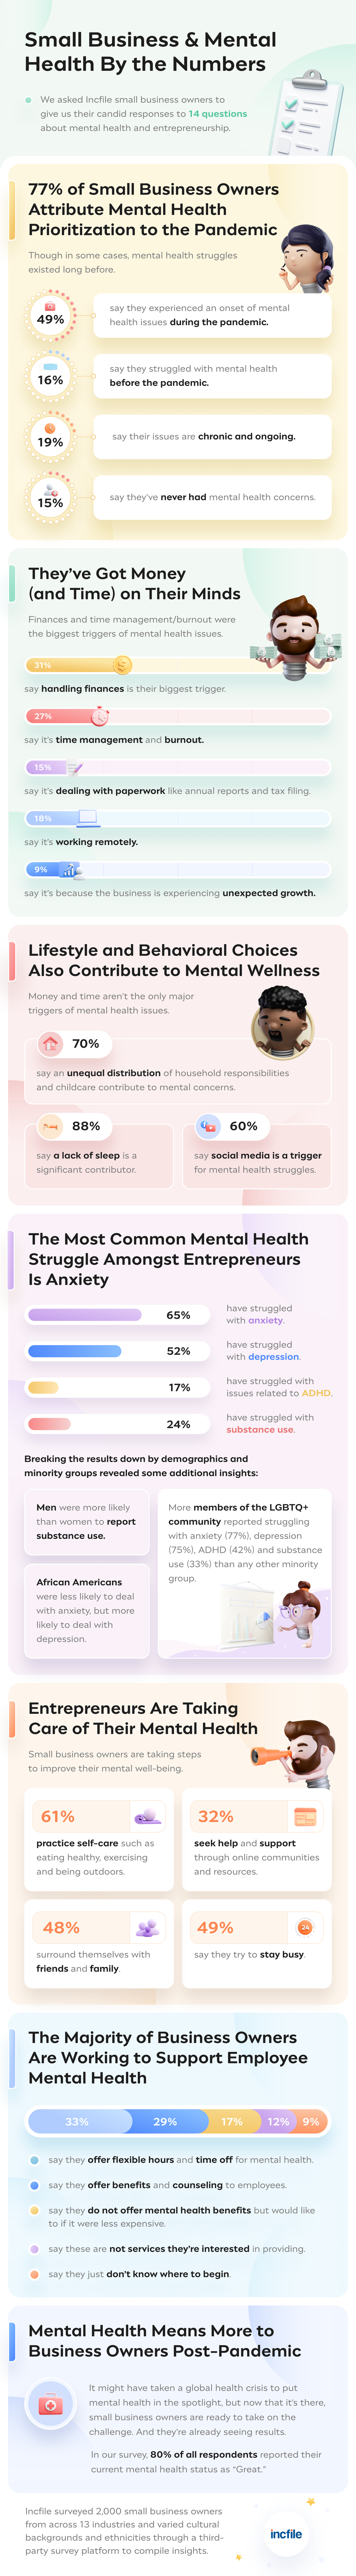 small business owners mental health survey